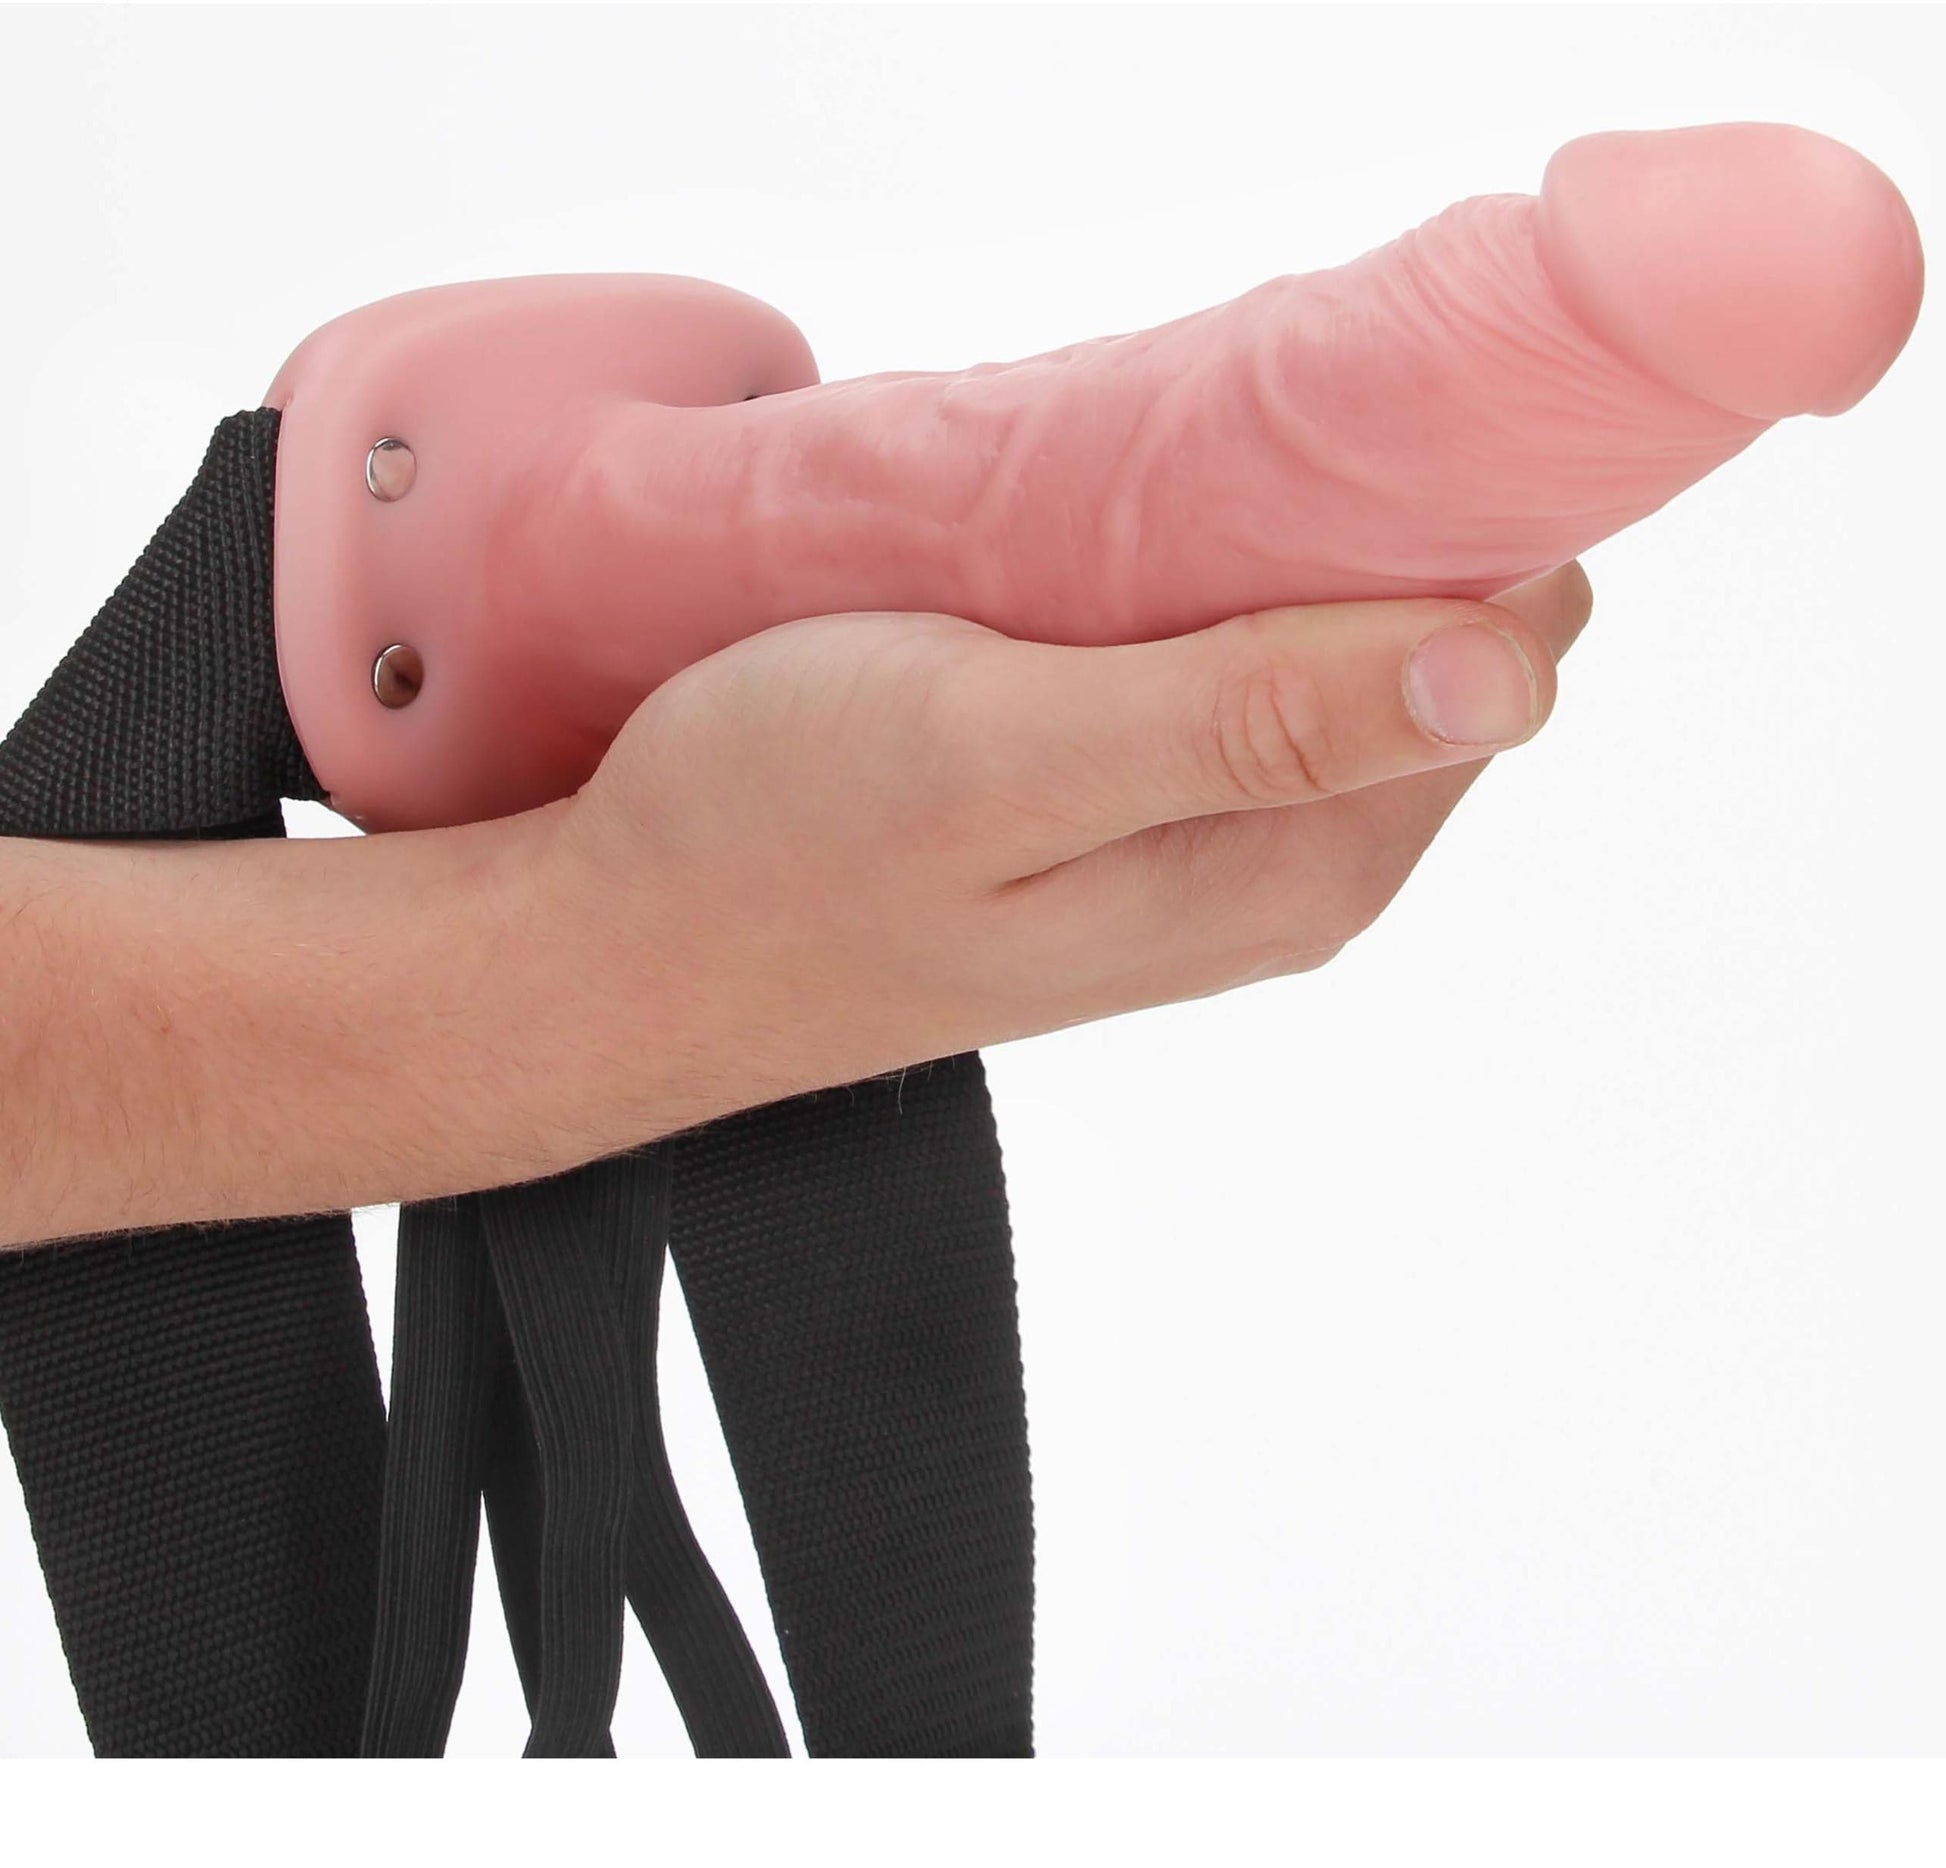 hollow strap on without balls 8 inch flesh